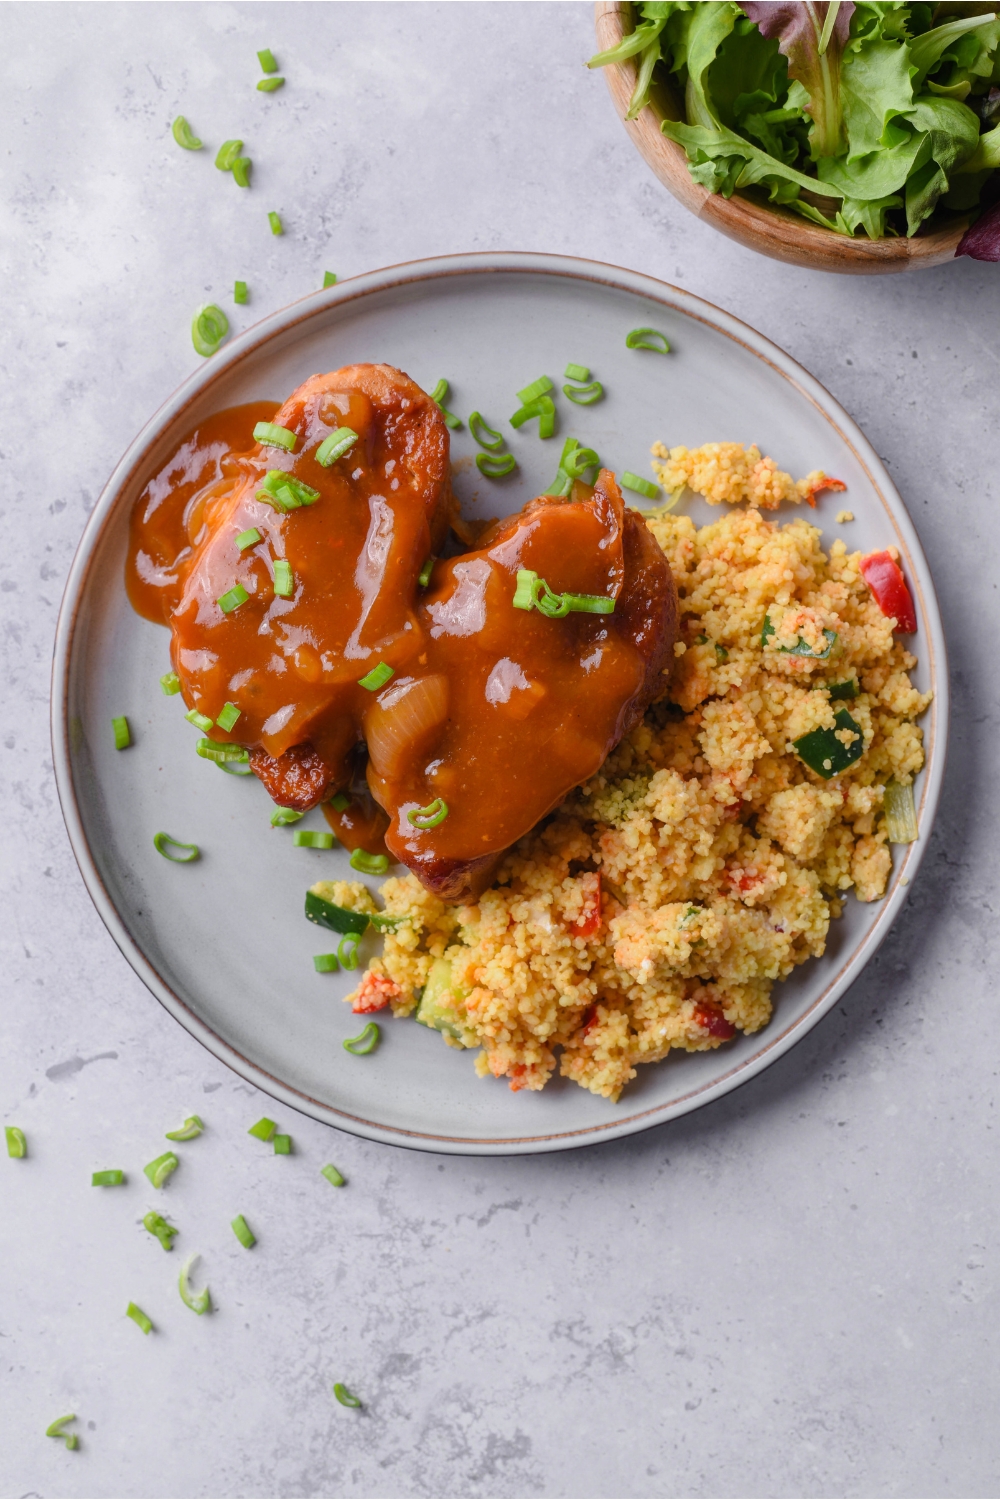 Overhead view of two pork chops covered in a brown gravy with a garnish of green onions and a side of couscous salad.